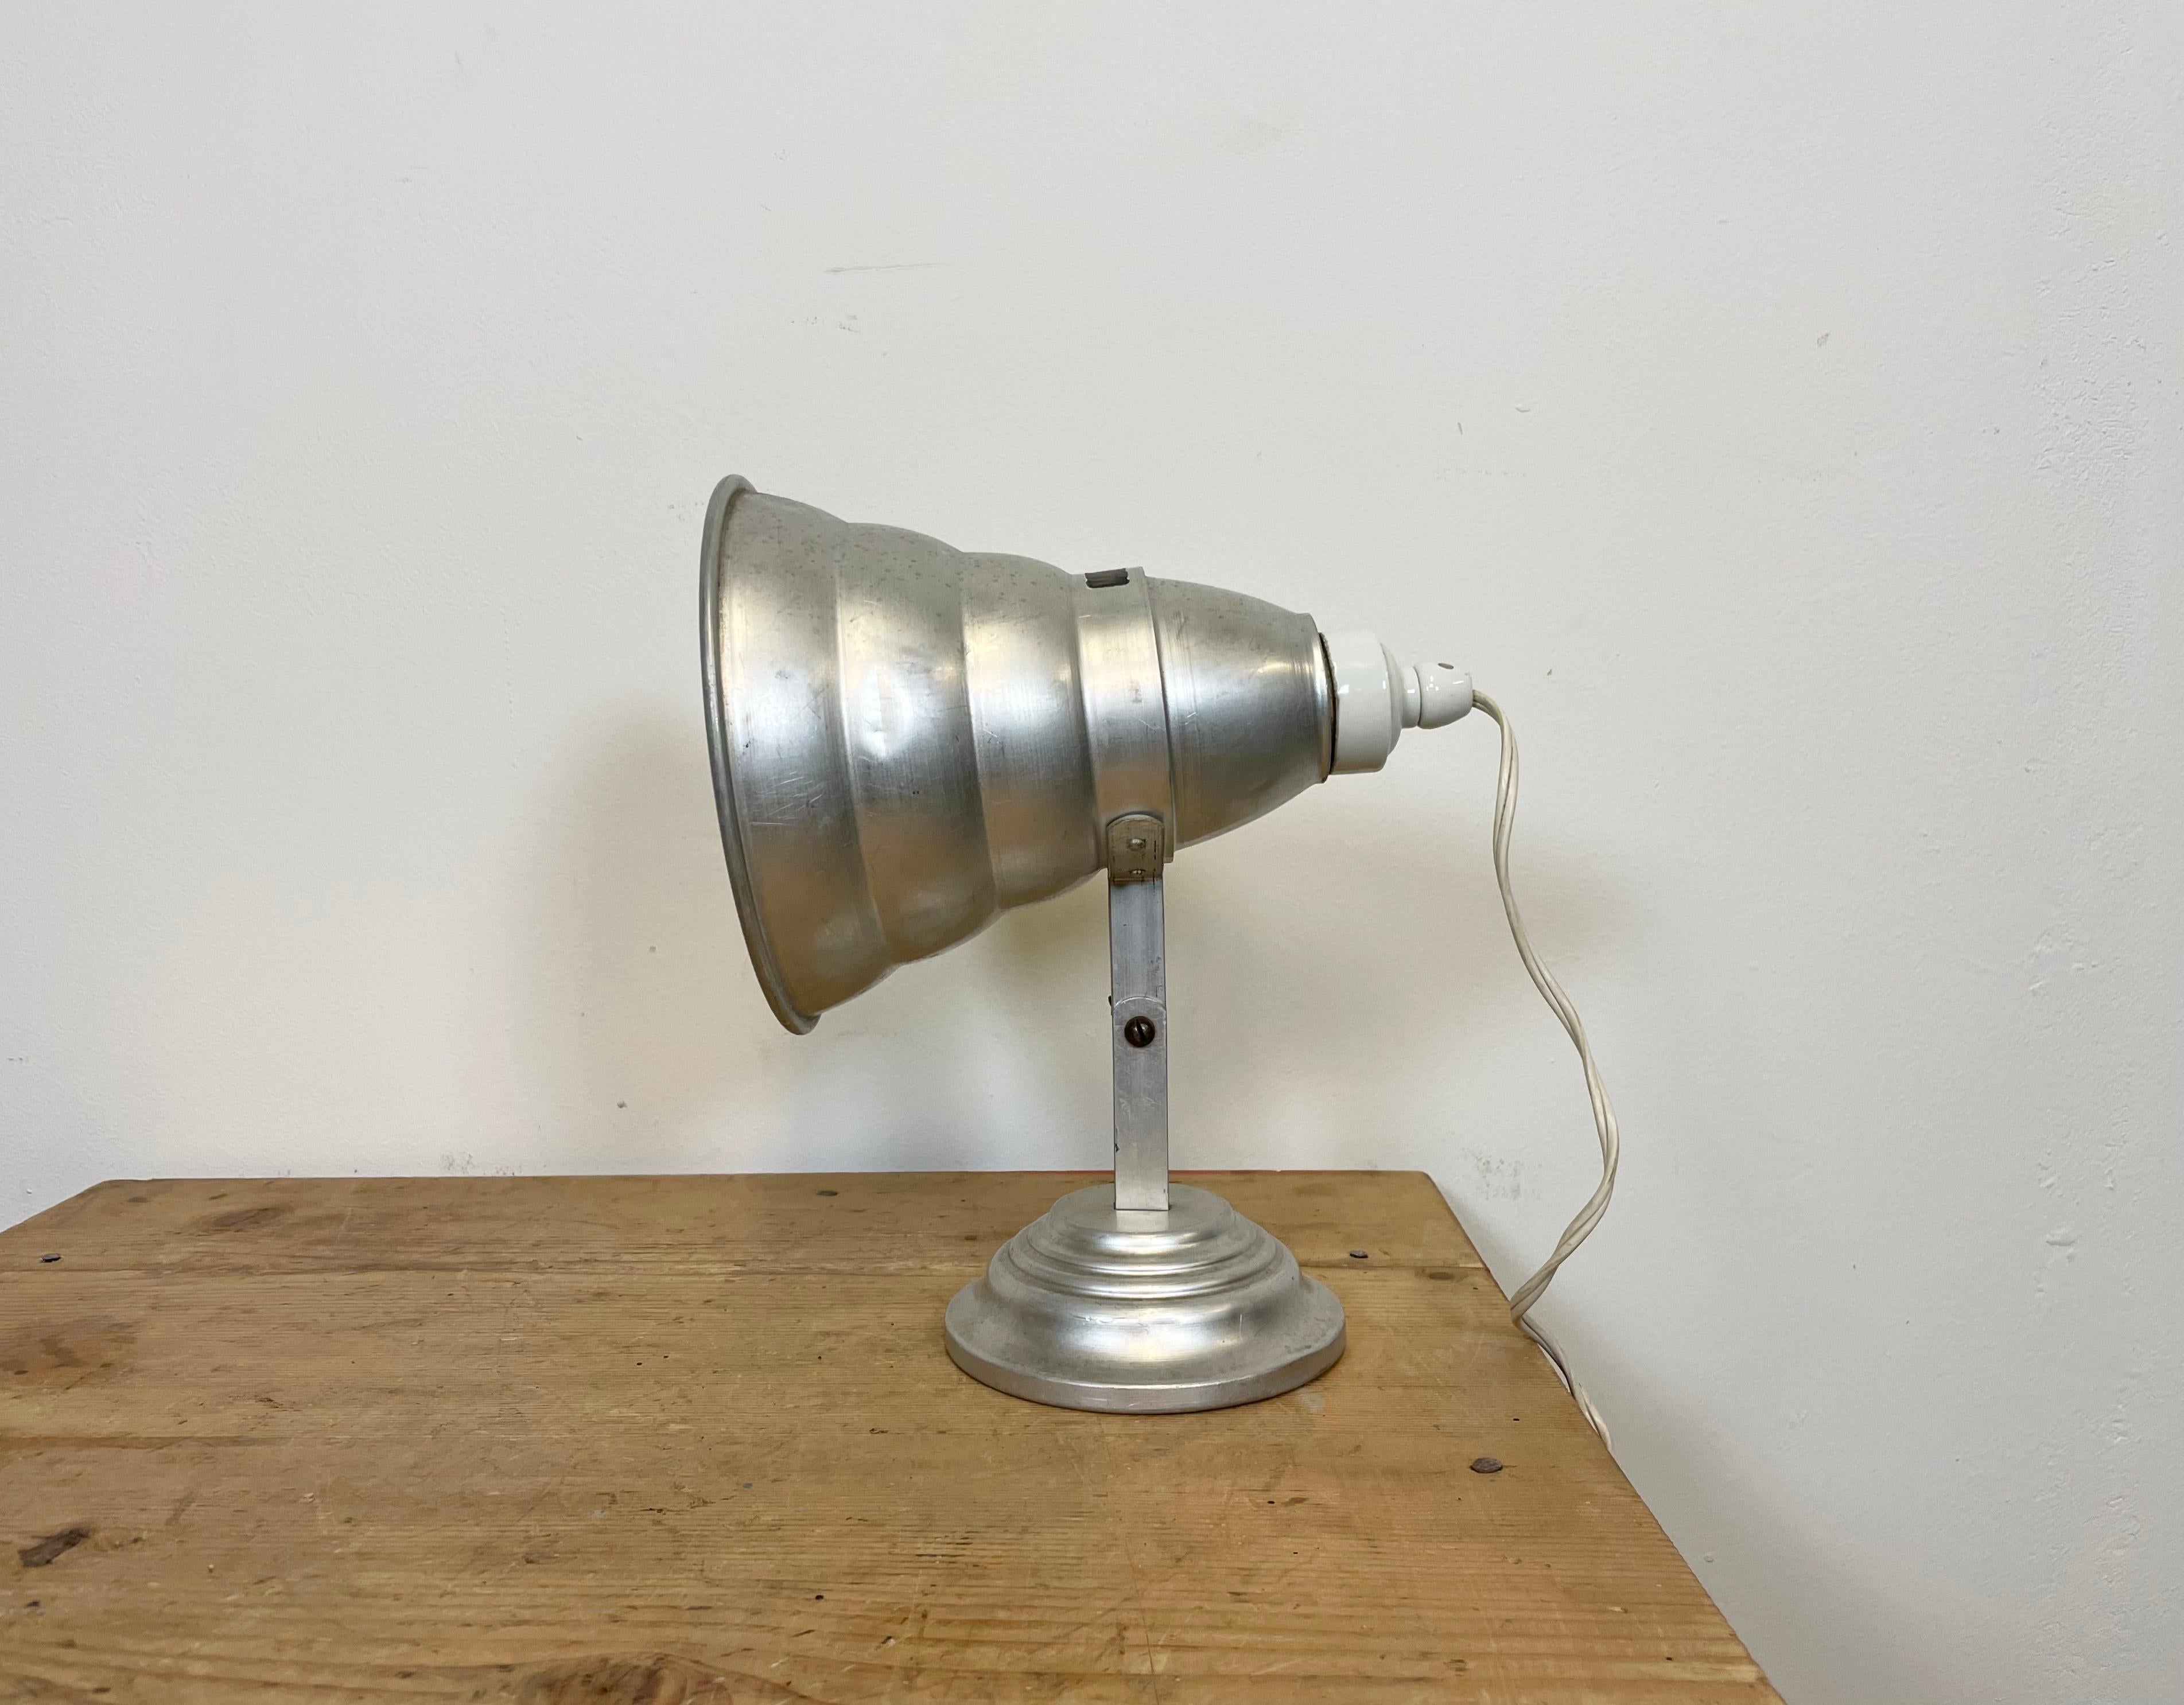 Vintage industrial table lamp from the 1960s. It features an aluminium shade, base, arm with one adjustable joint and a porcelain top with switch. The socket requires E 27 light bulbs. The diameter of the shade is 18 cm. Good vintage condition.